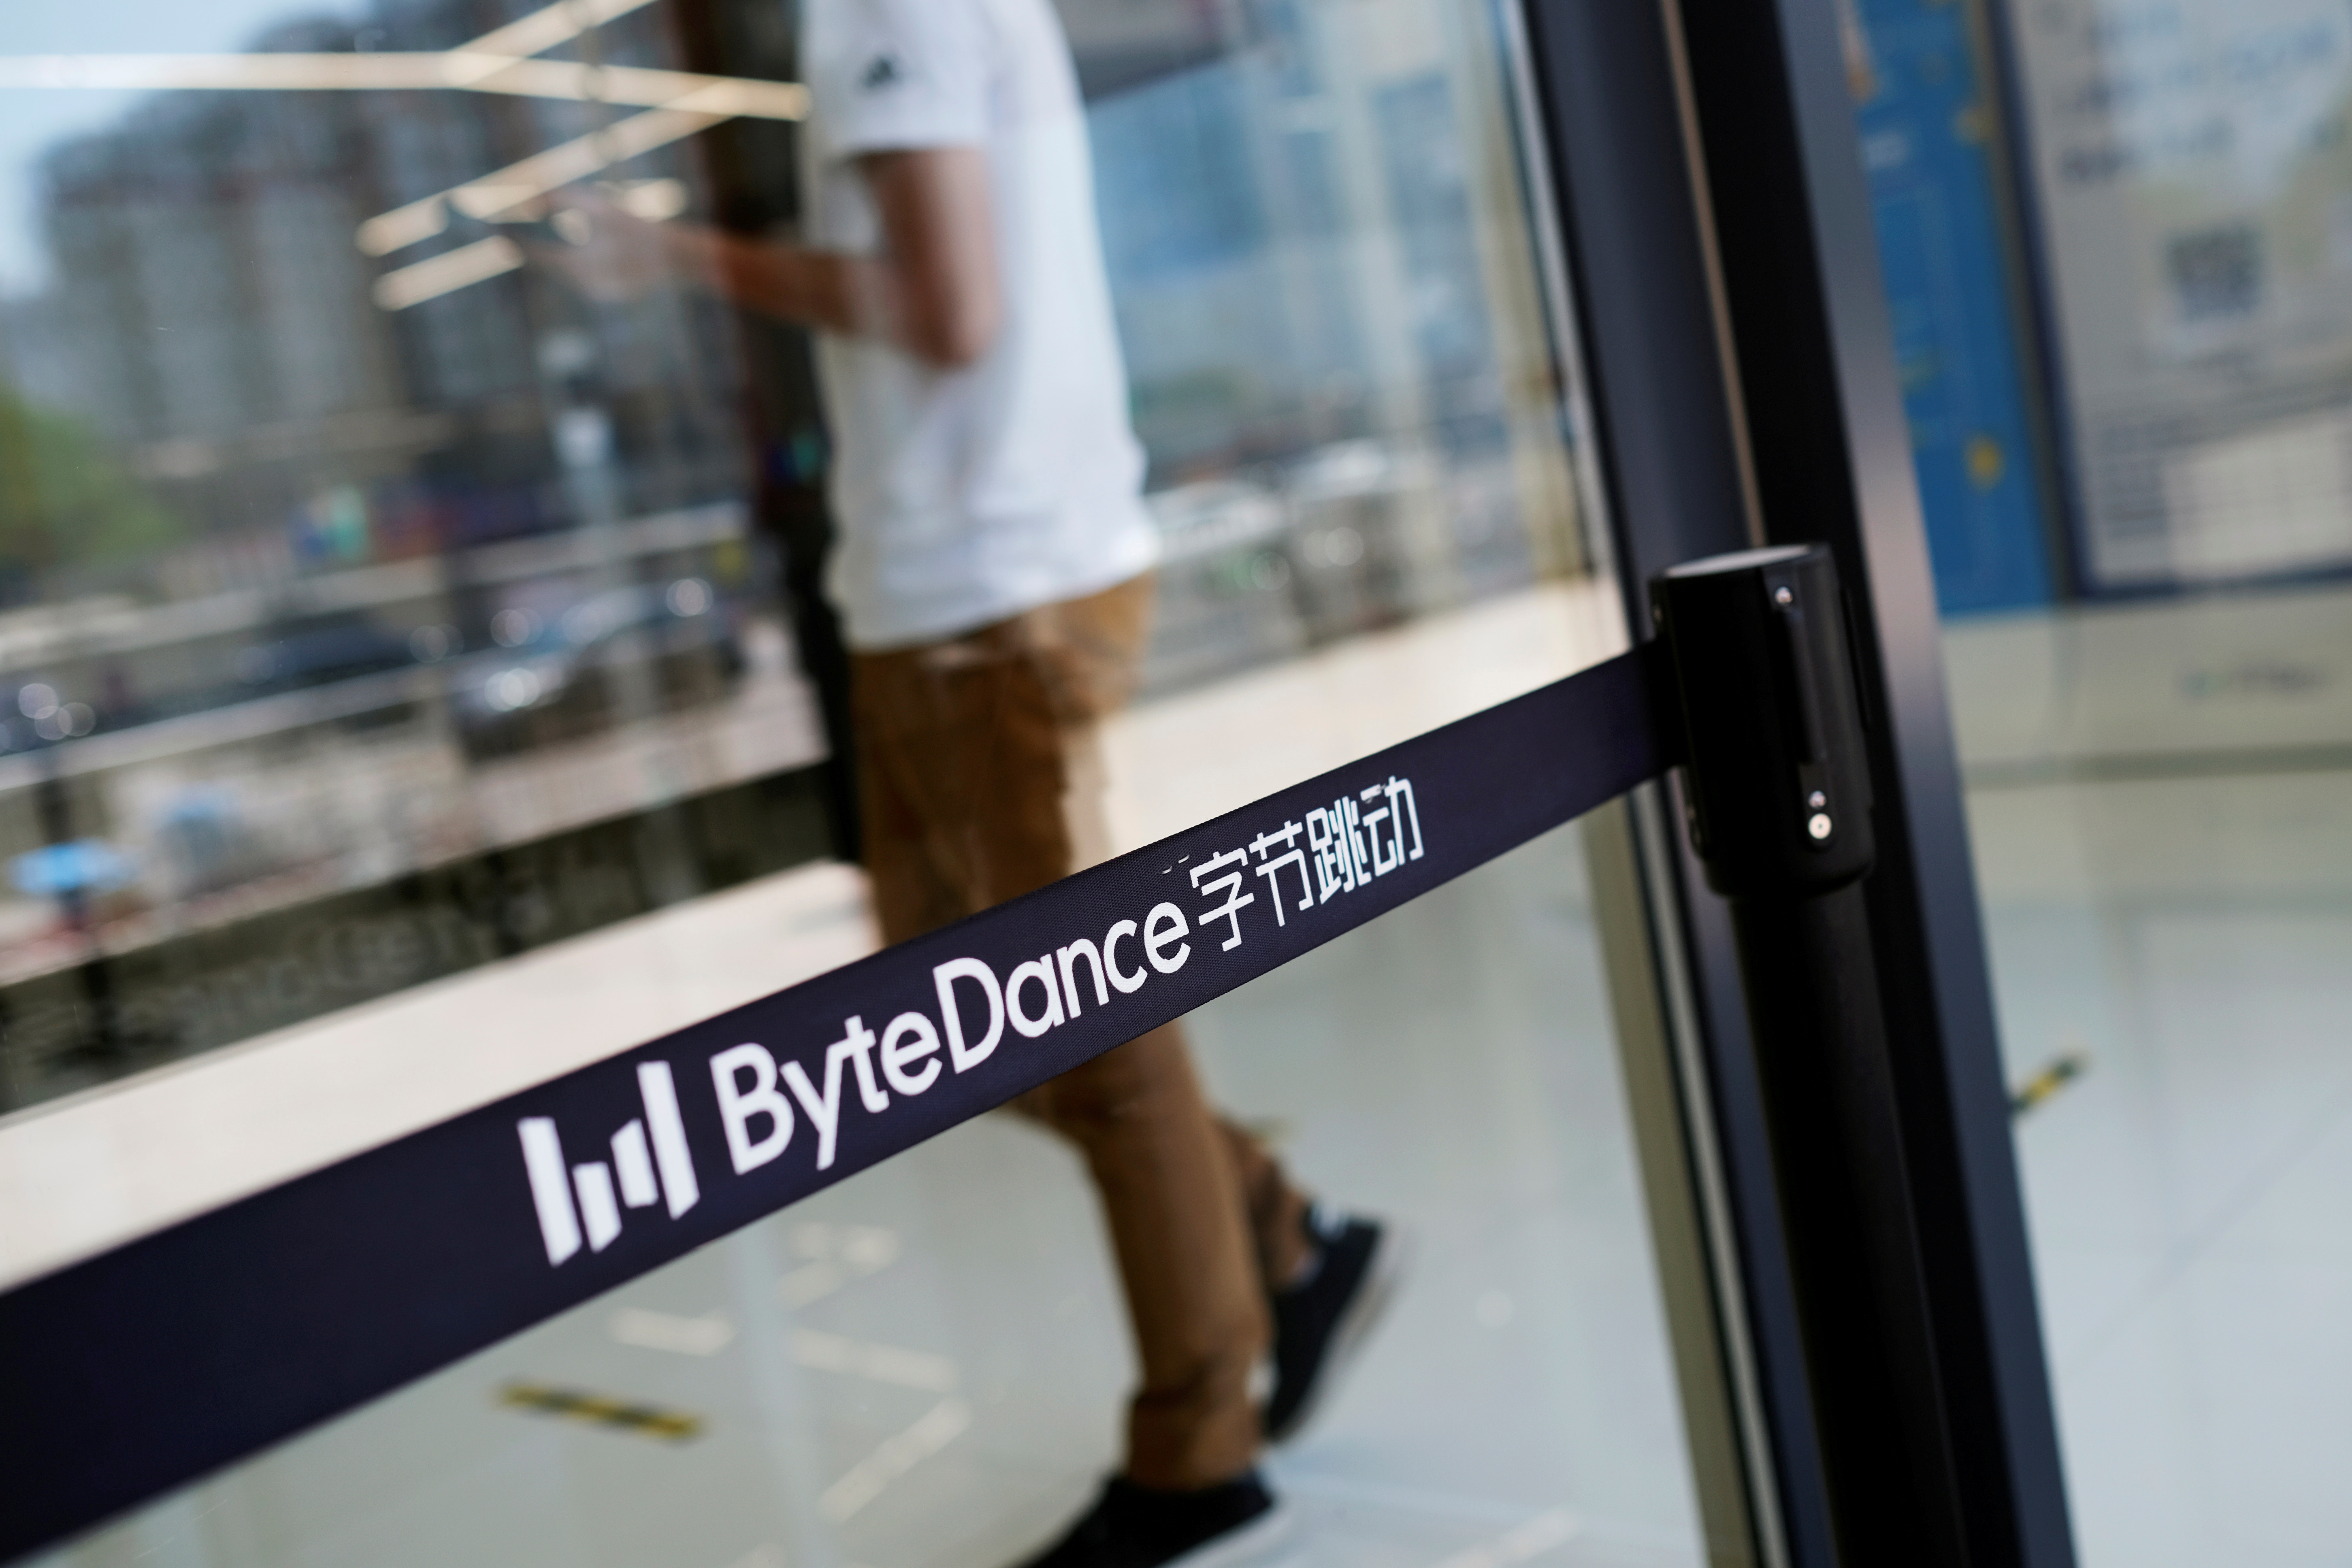 A man walks by a logo of Bytedance, the China-based company which owns the short video app TikTok, or Douyin, at its office in Beijing, China July 7, 2020.  REUTERS/Thomas Suen